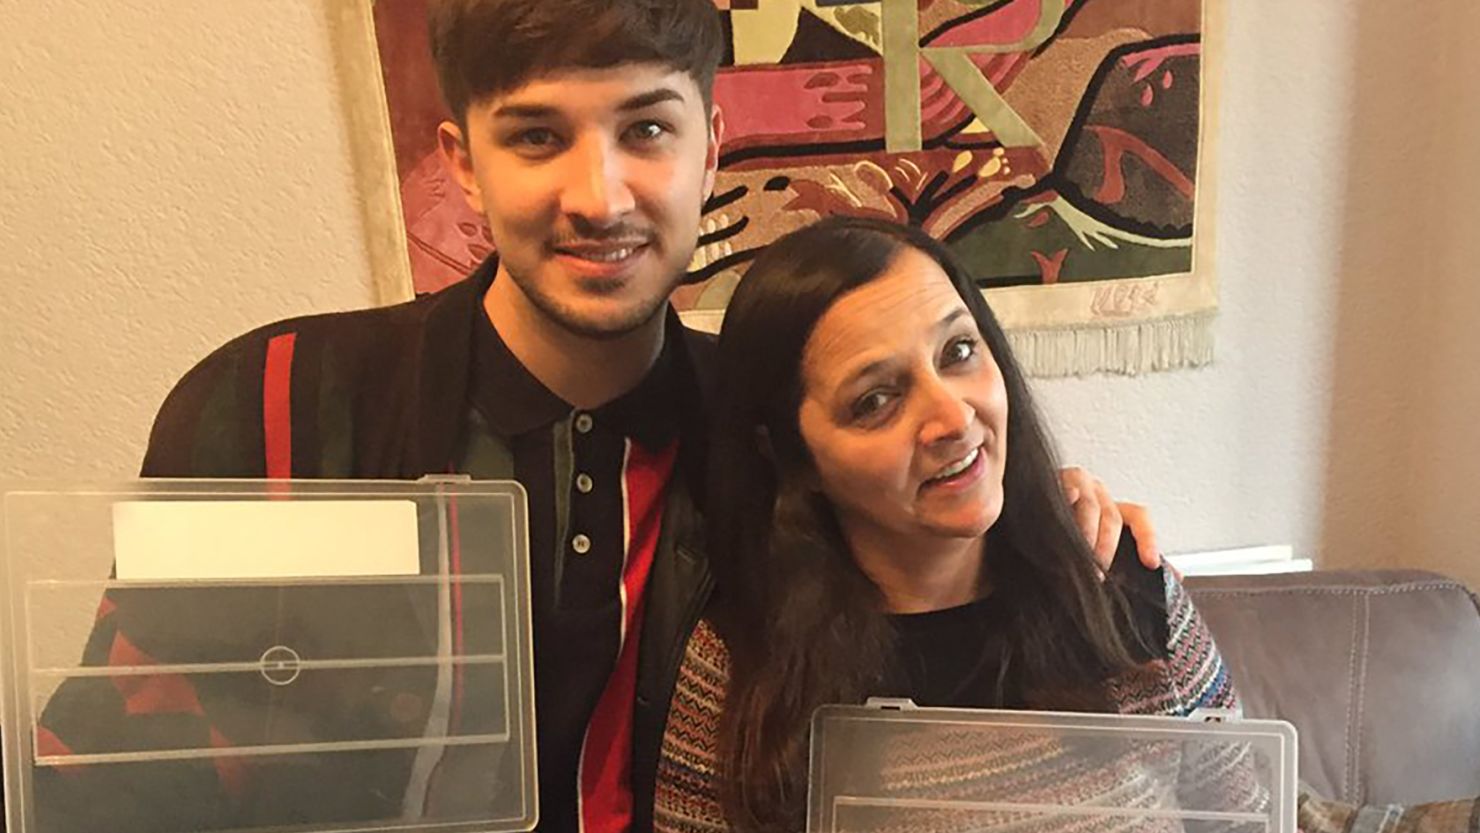 Martyn Hett and his mother pose for a photo after a "busy weekend knitting."